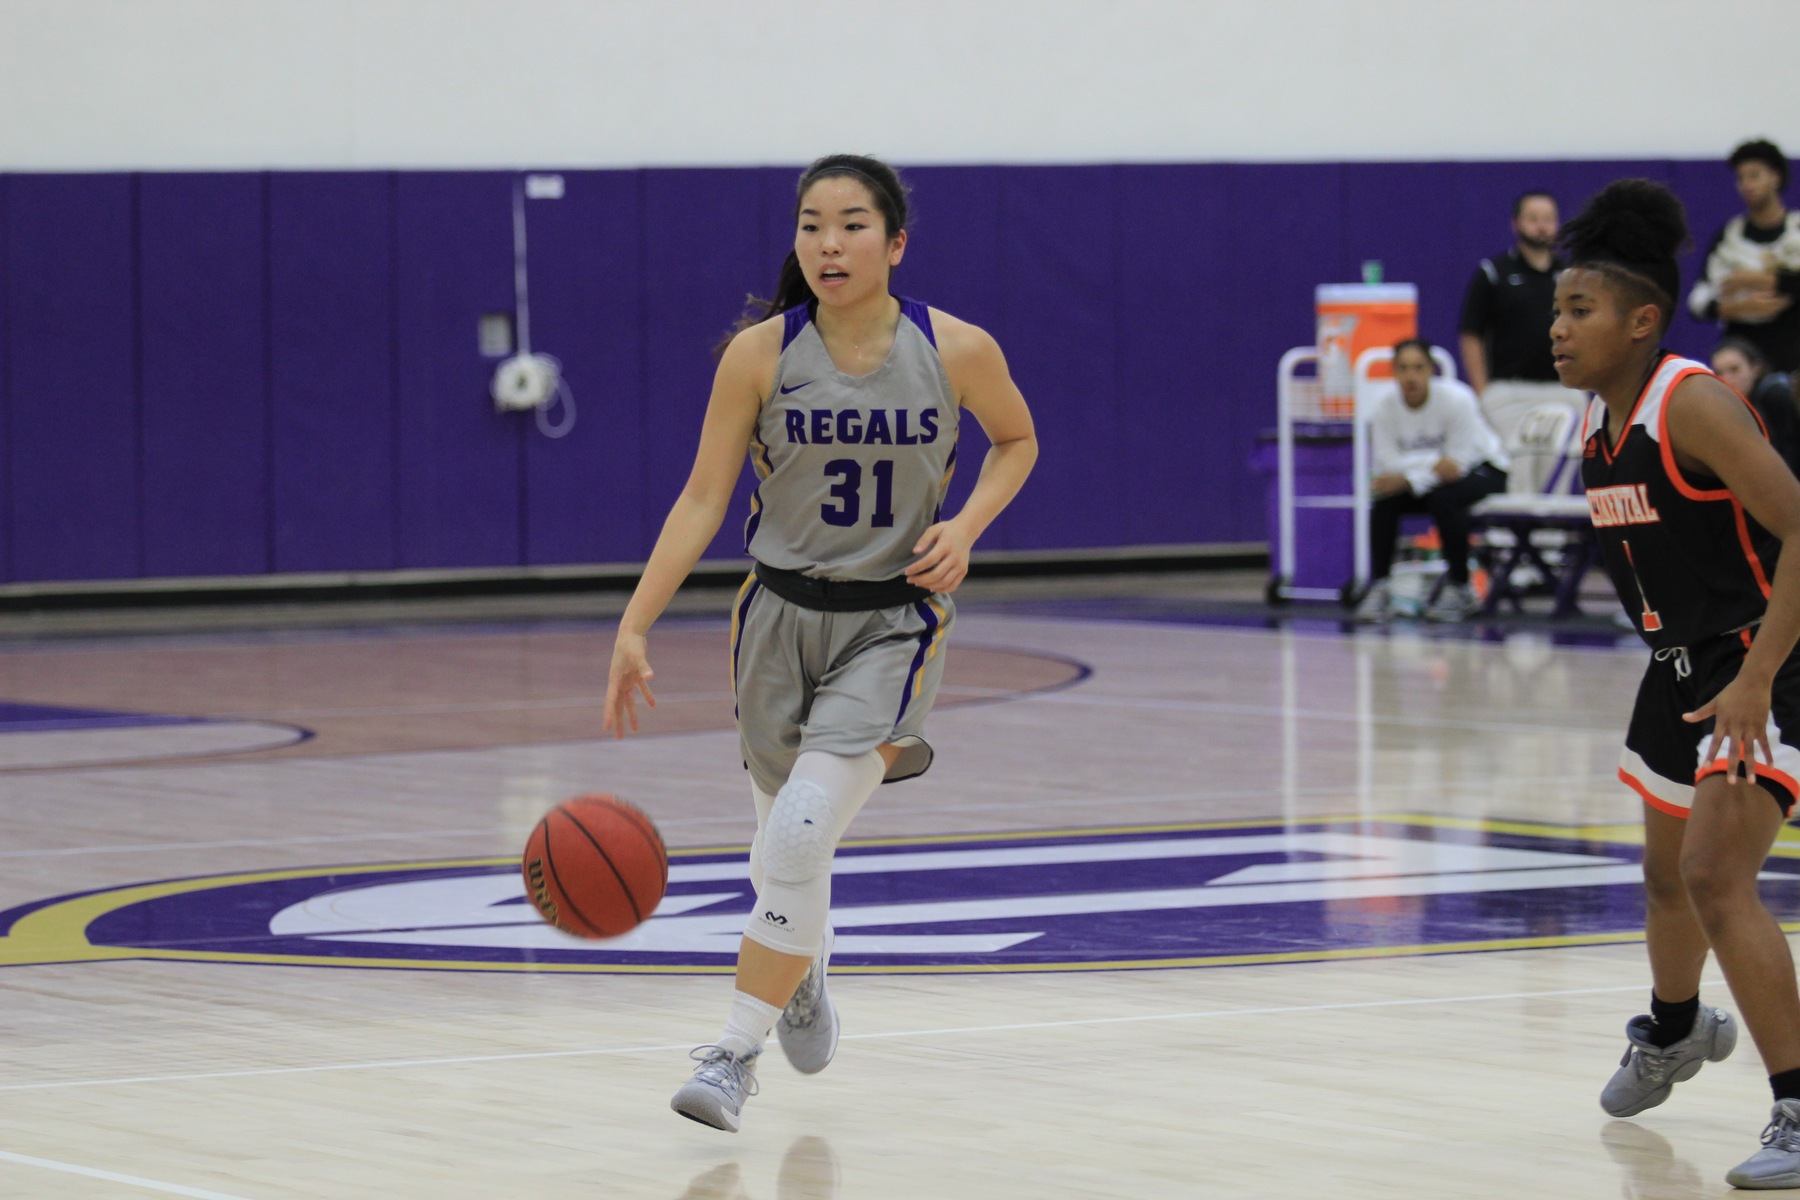 Sophomore guard Mackenzy Iwahashi knocked down a pair of free throws to give the Regals the lead with five seconds left in their 81-79 win over UC Santa Cruz. (Photo Credit: Gabby Flores)